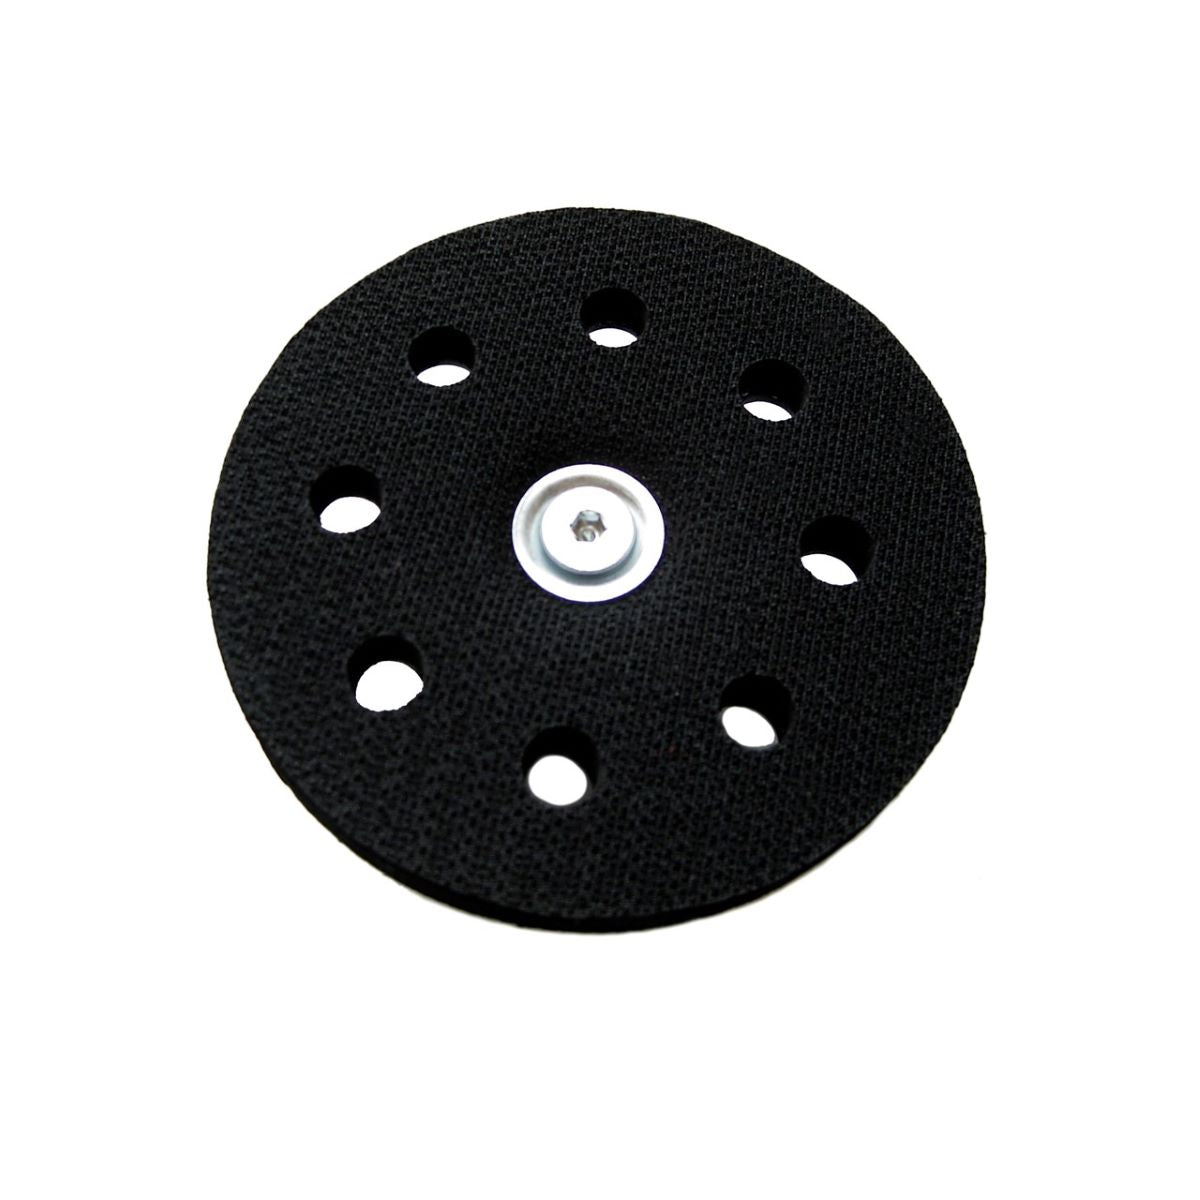 5" 8 Hole Black Hook Rotary Pad w/ Center Screw - For Rotary Sander Hook Discs